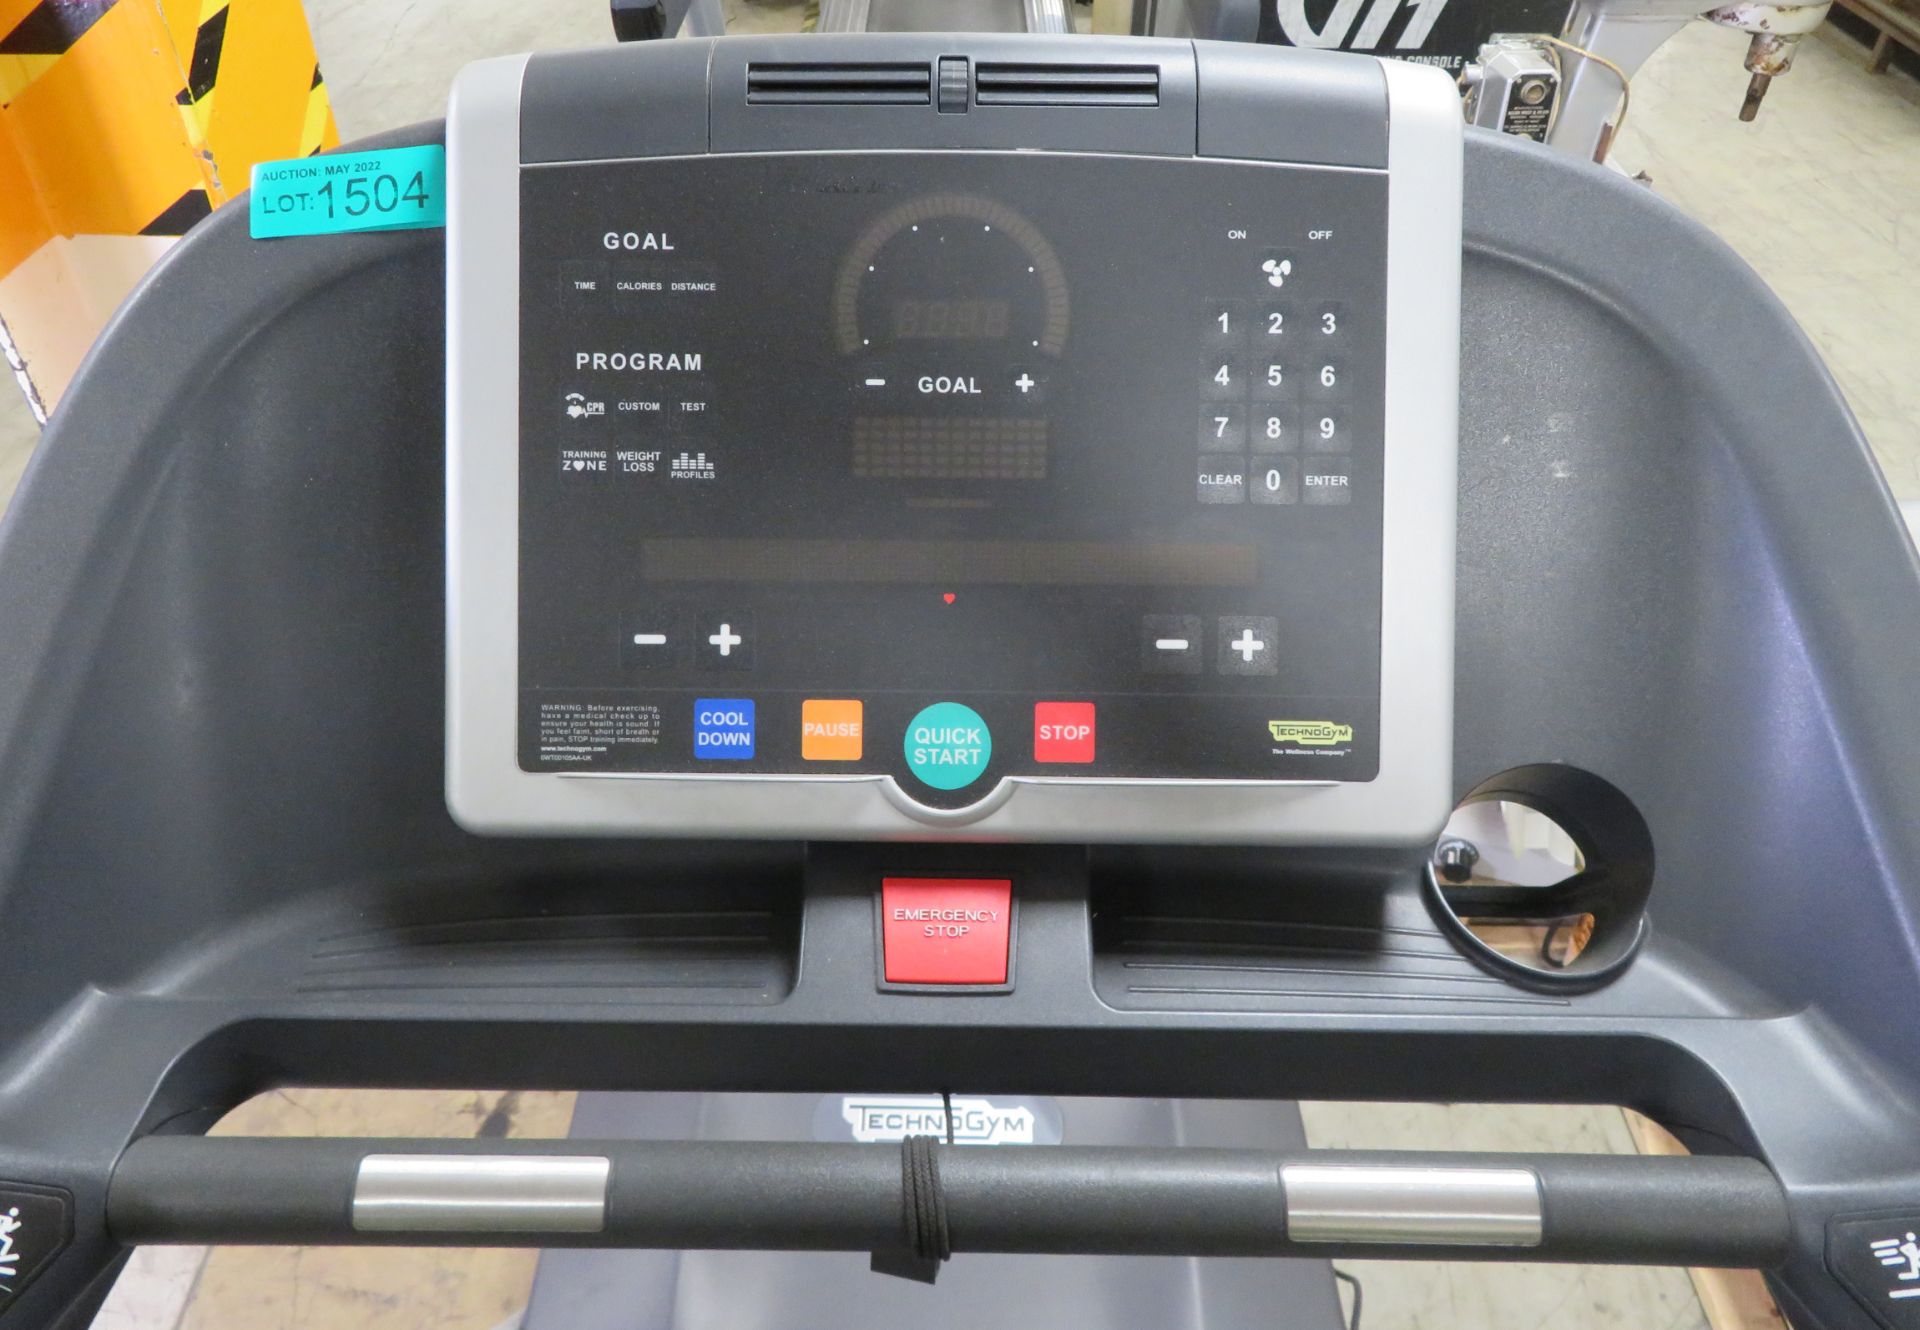 TechnoGym Excite Run Now 700 Treadmill With LCD Console - Image 4 of 4